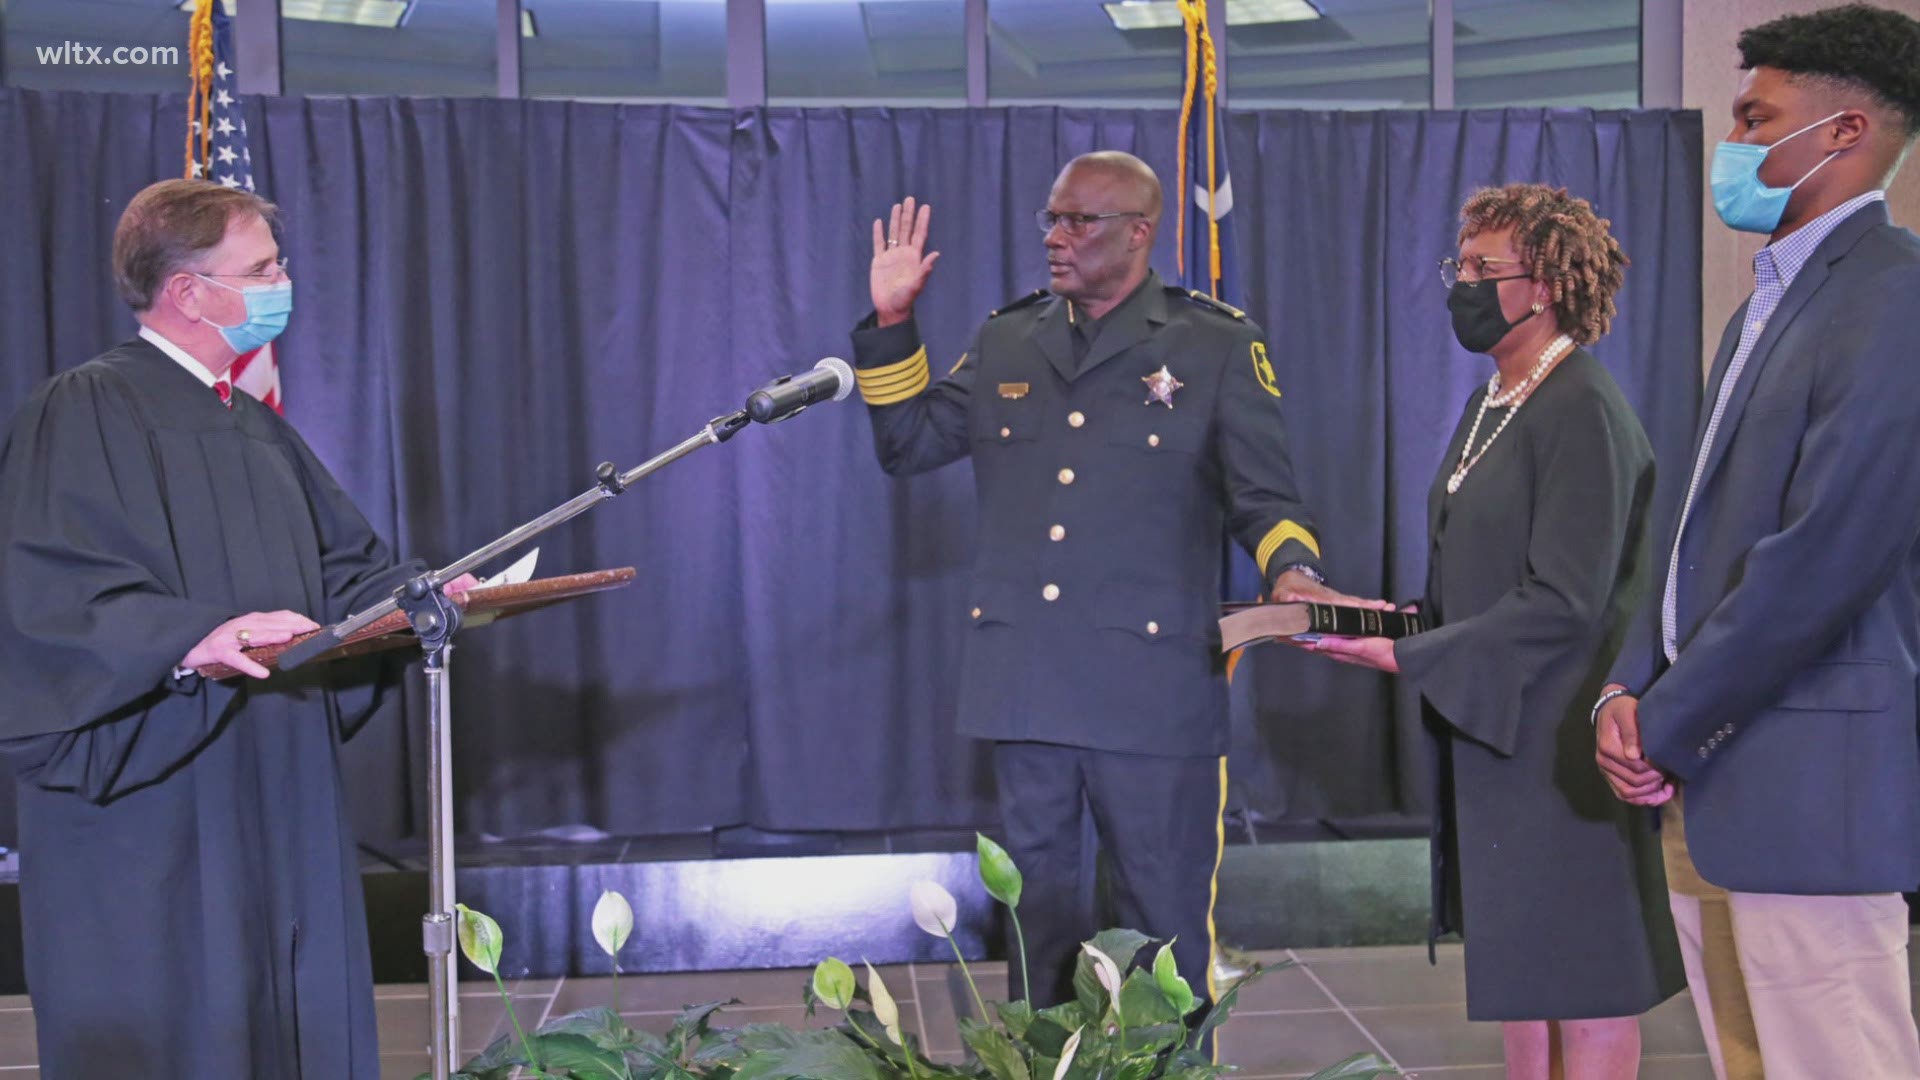 Several Sumter County elected officials were sworn into office Monday. Among them was Sheriff Anthony Dennis, Clerk of Court James Campbell and Coroner Robert Baker.